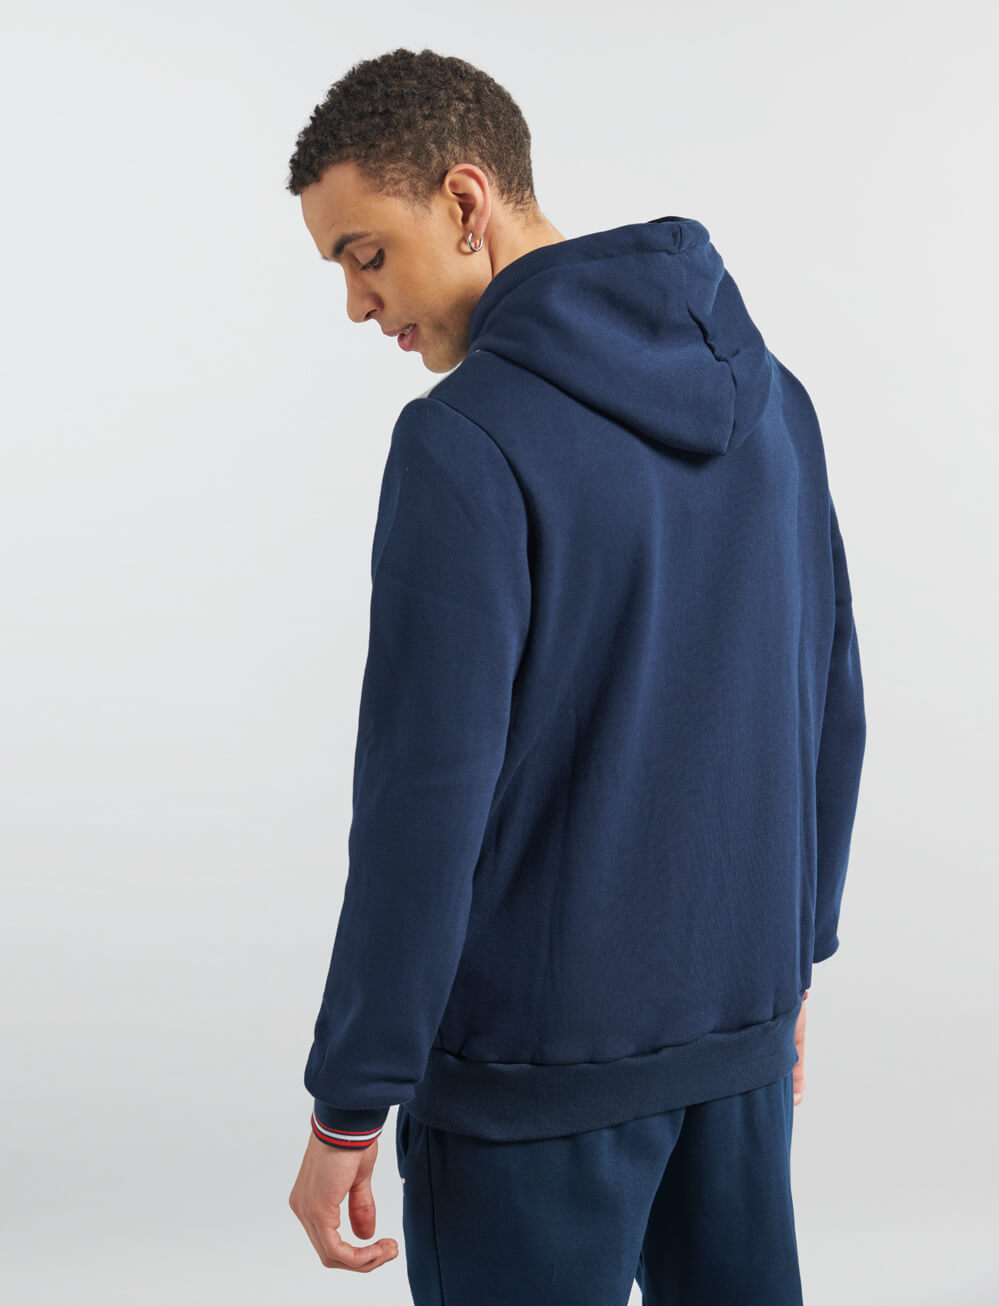 Official Arsenal Full Zip Hoodie - Navy - The World Football Store